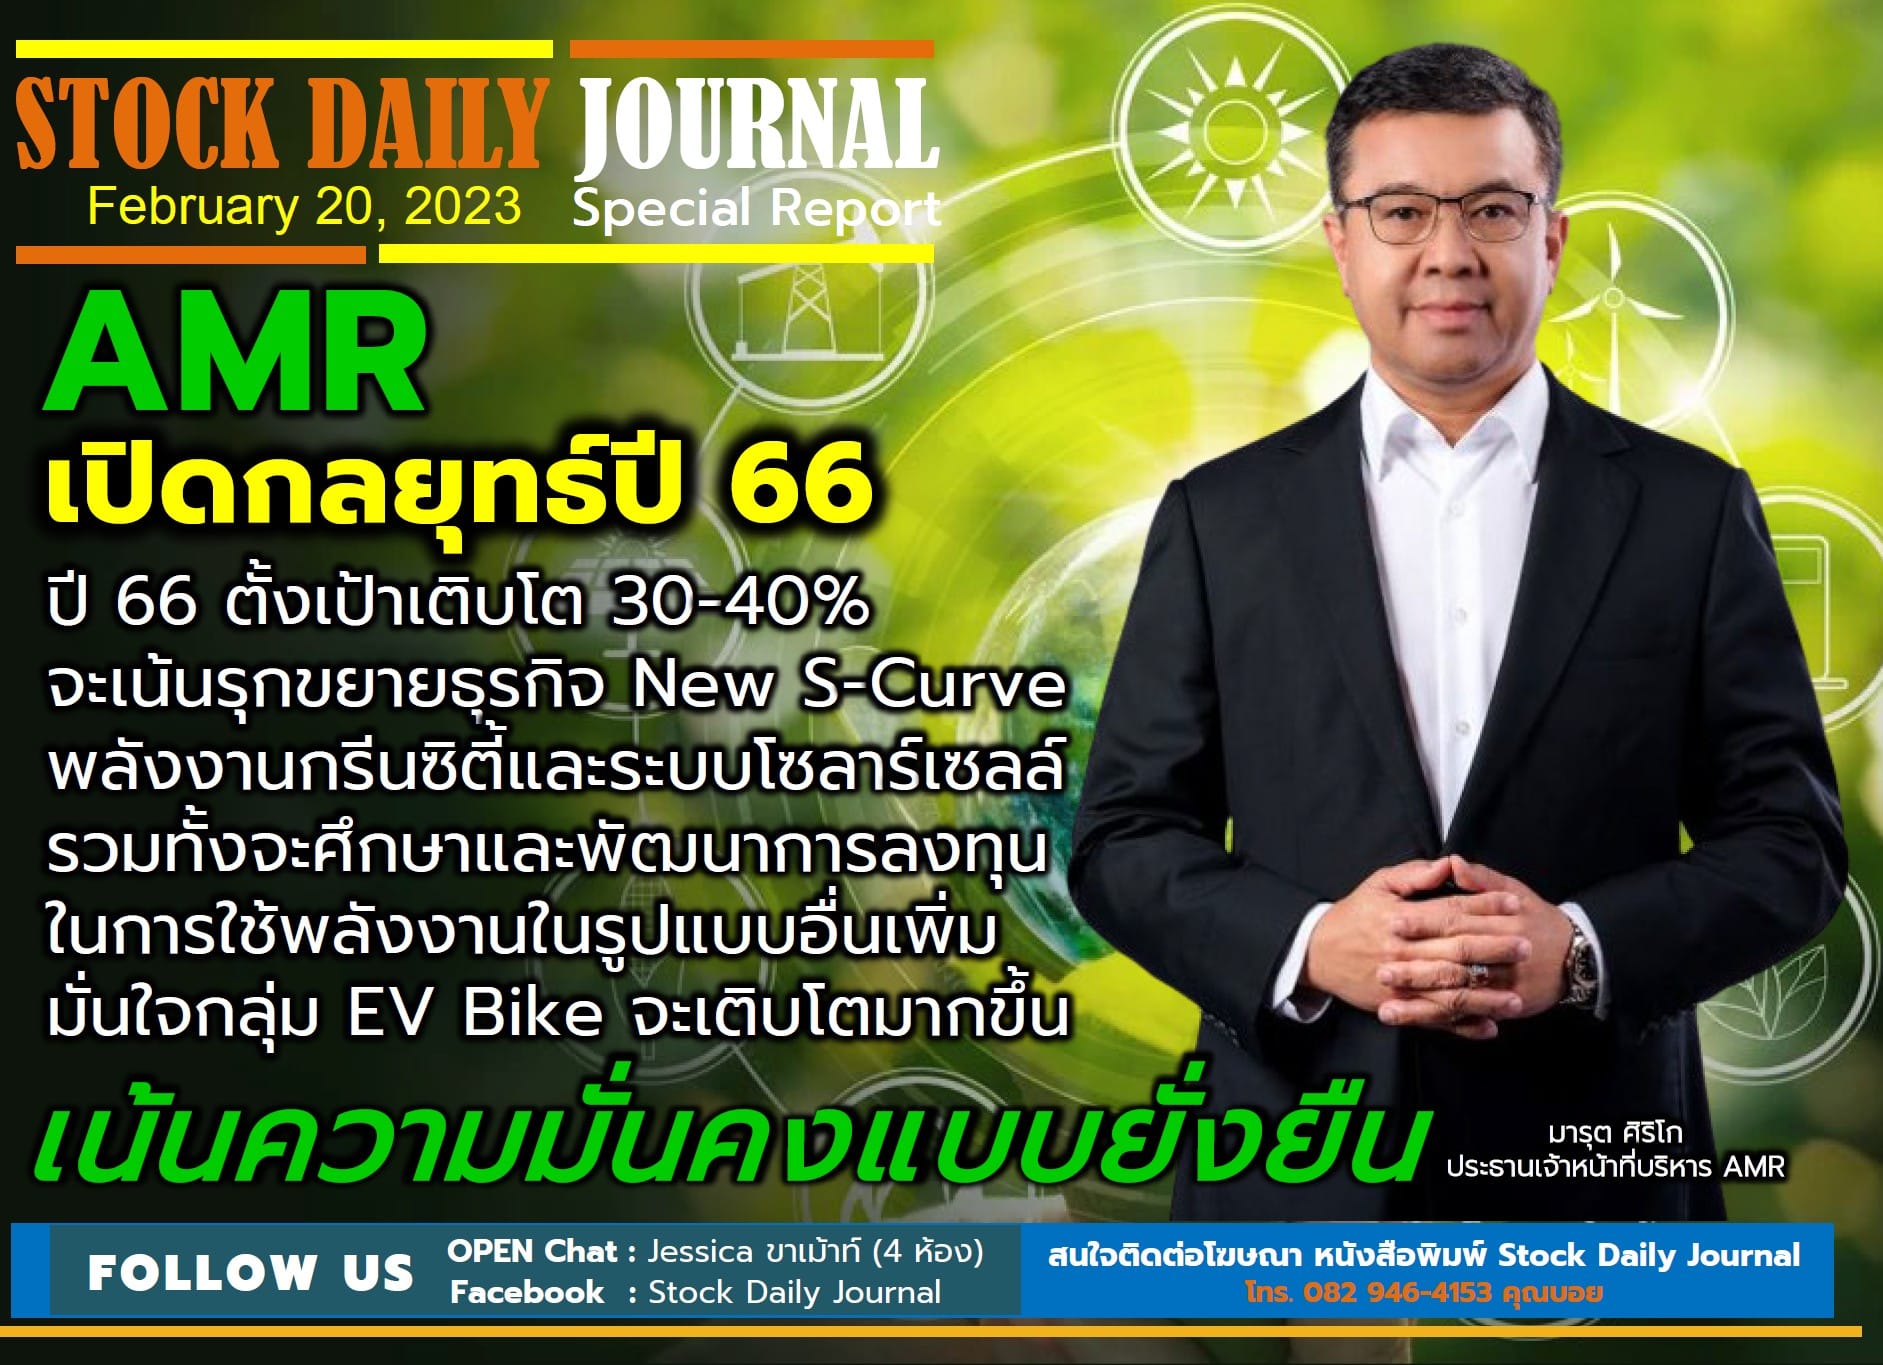 STOCK DAILY JOURNAL “Special Report : AMR”